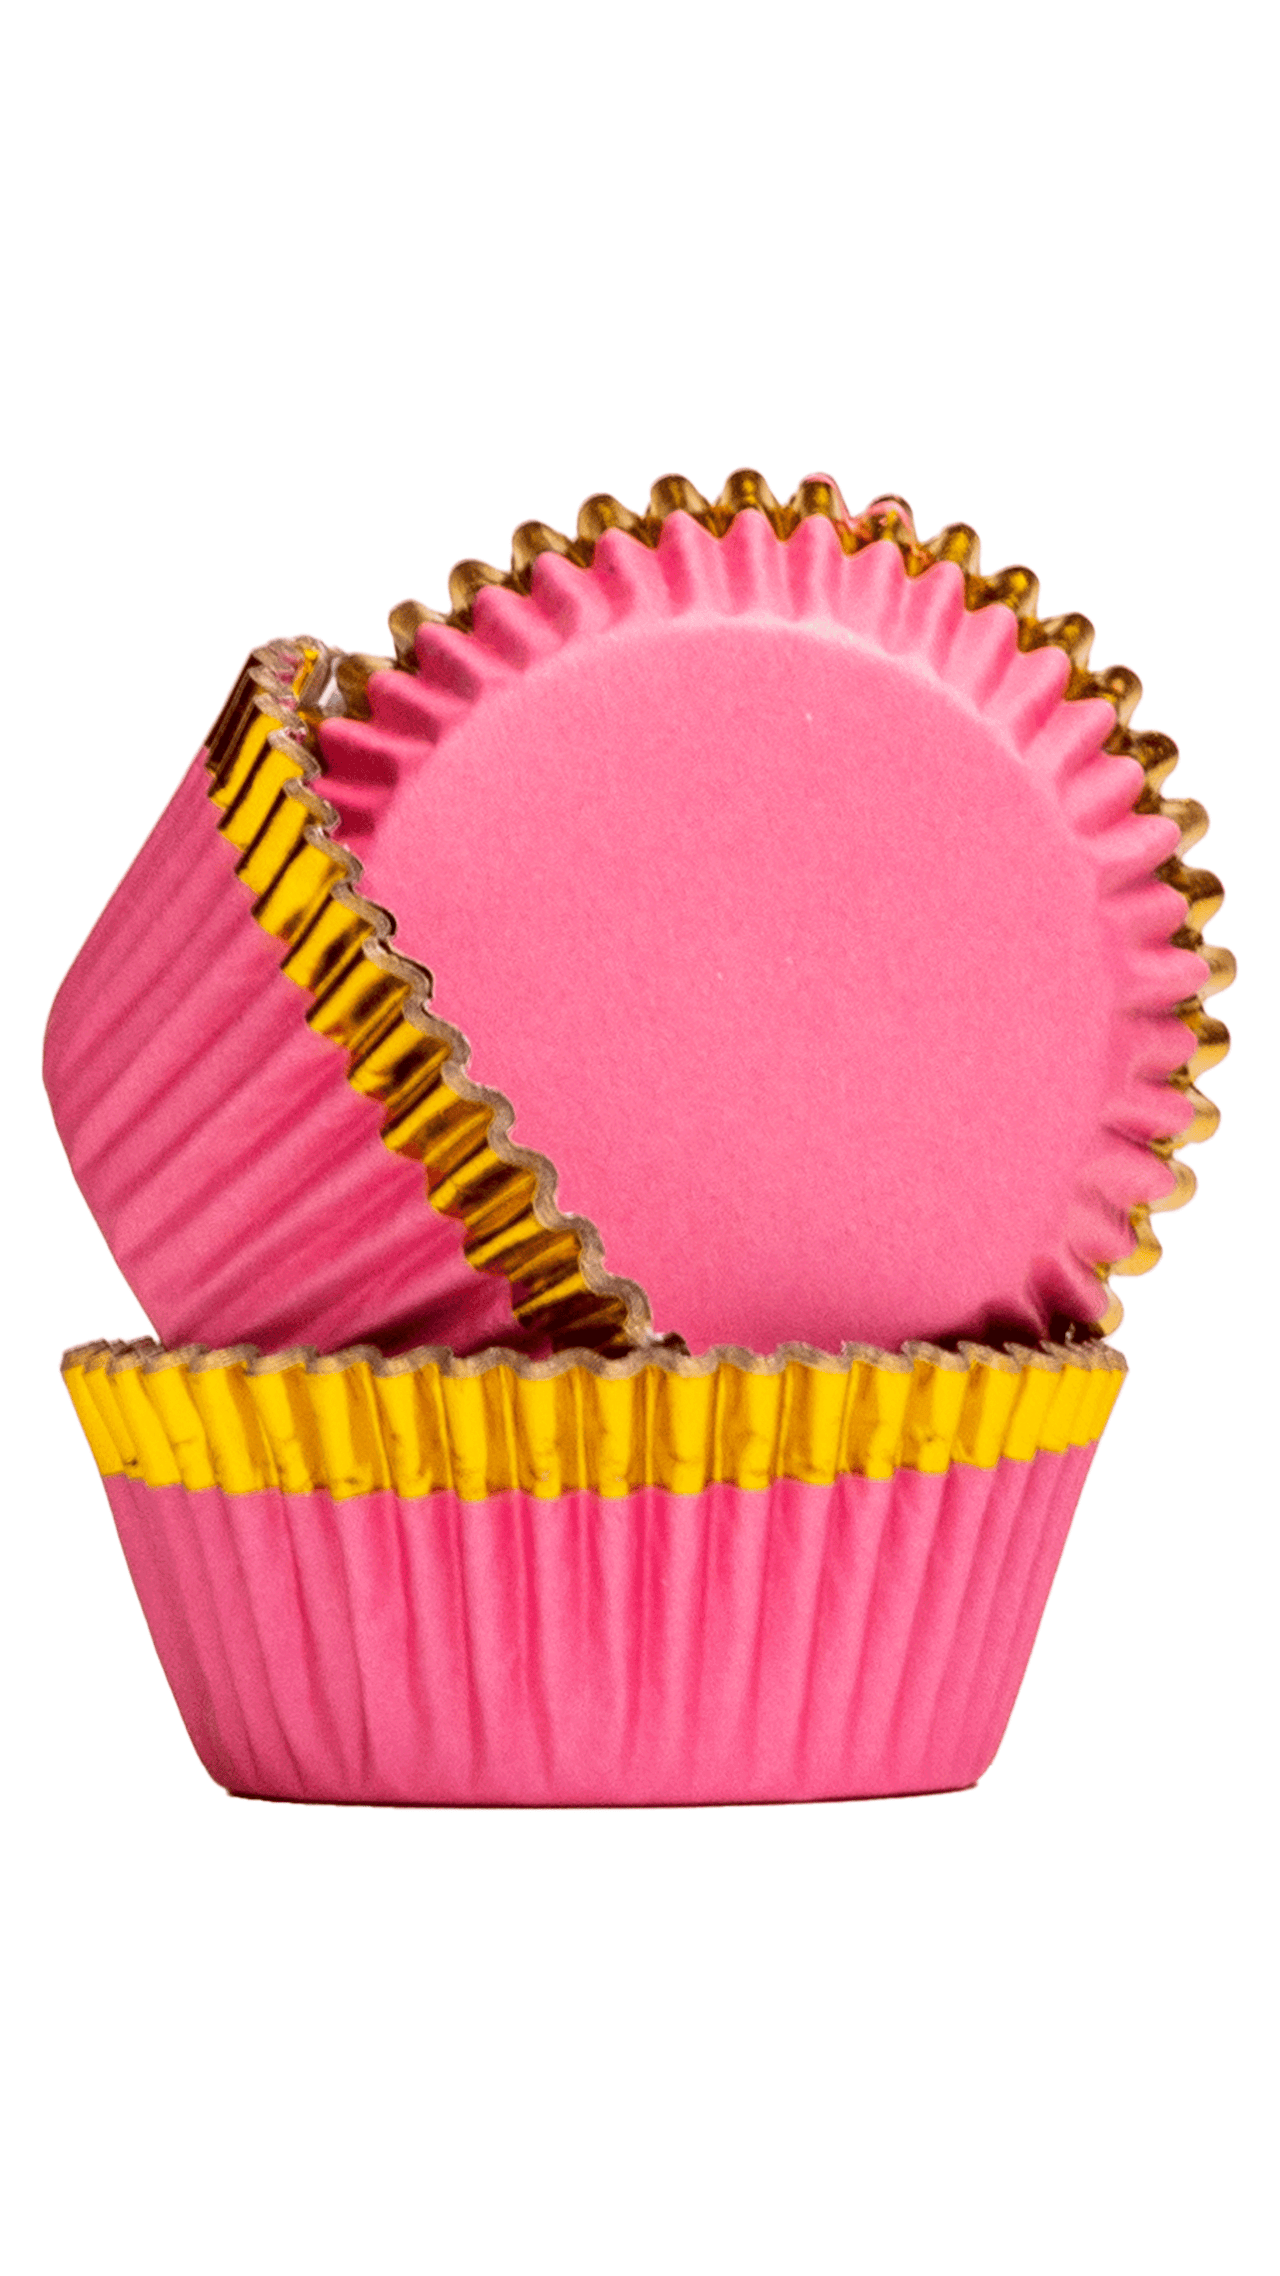 PME - Cupcake Cases - Pink with Gold Trim - 30 Pack Cupcake Cases PME